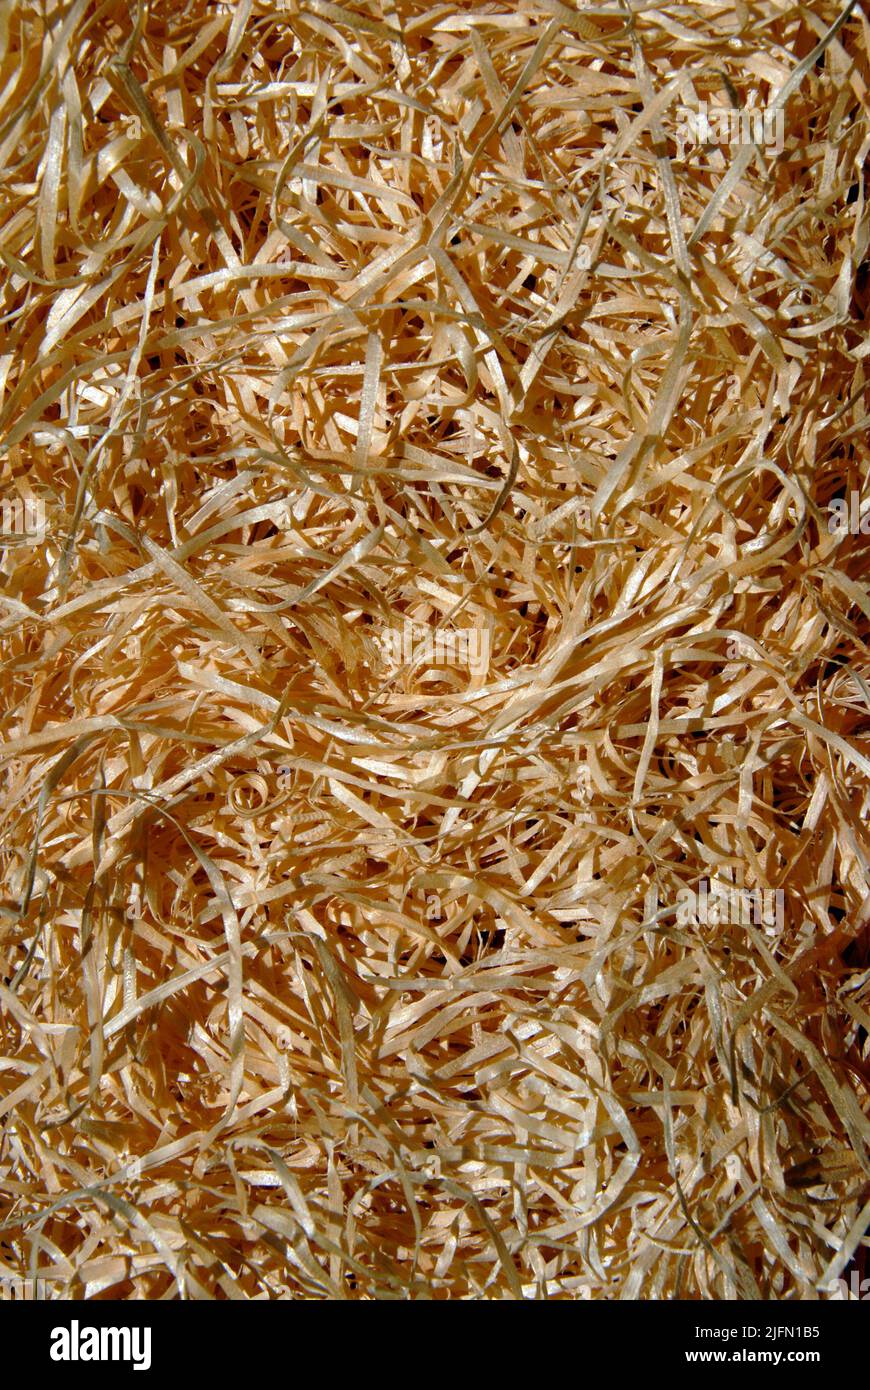 Abstract of straw used as packaging for protection of contents Stock Photo